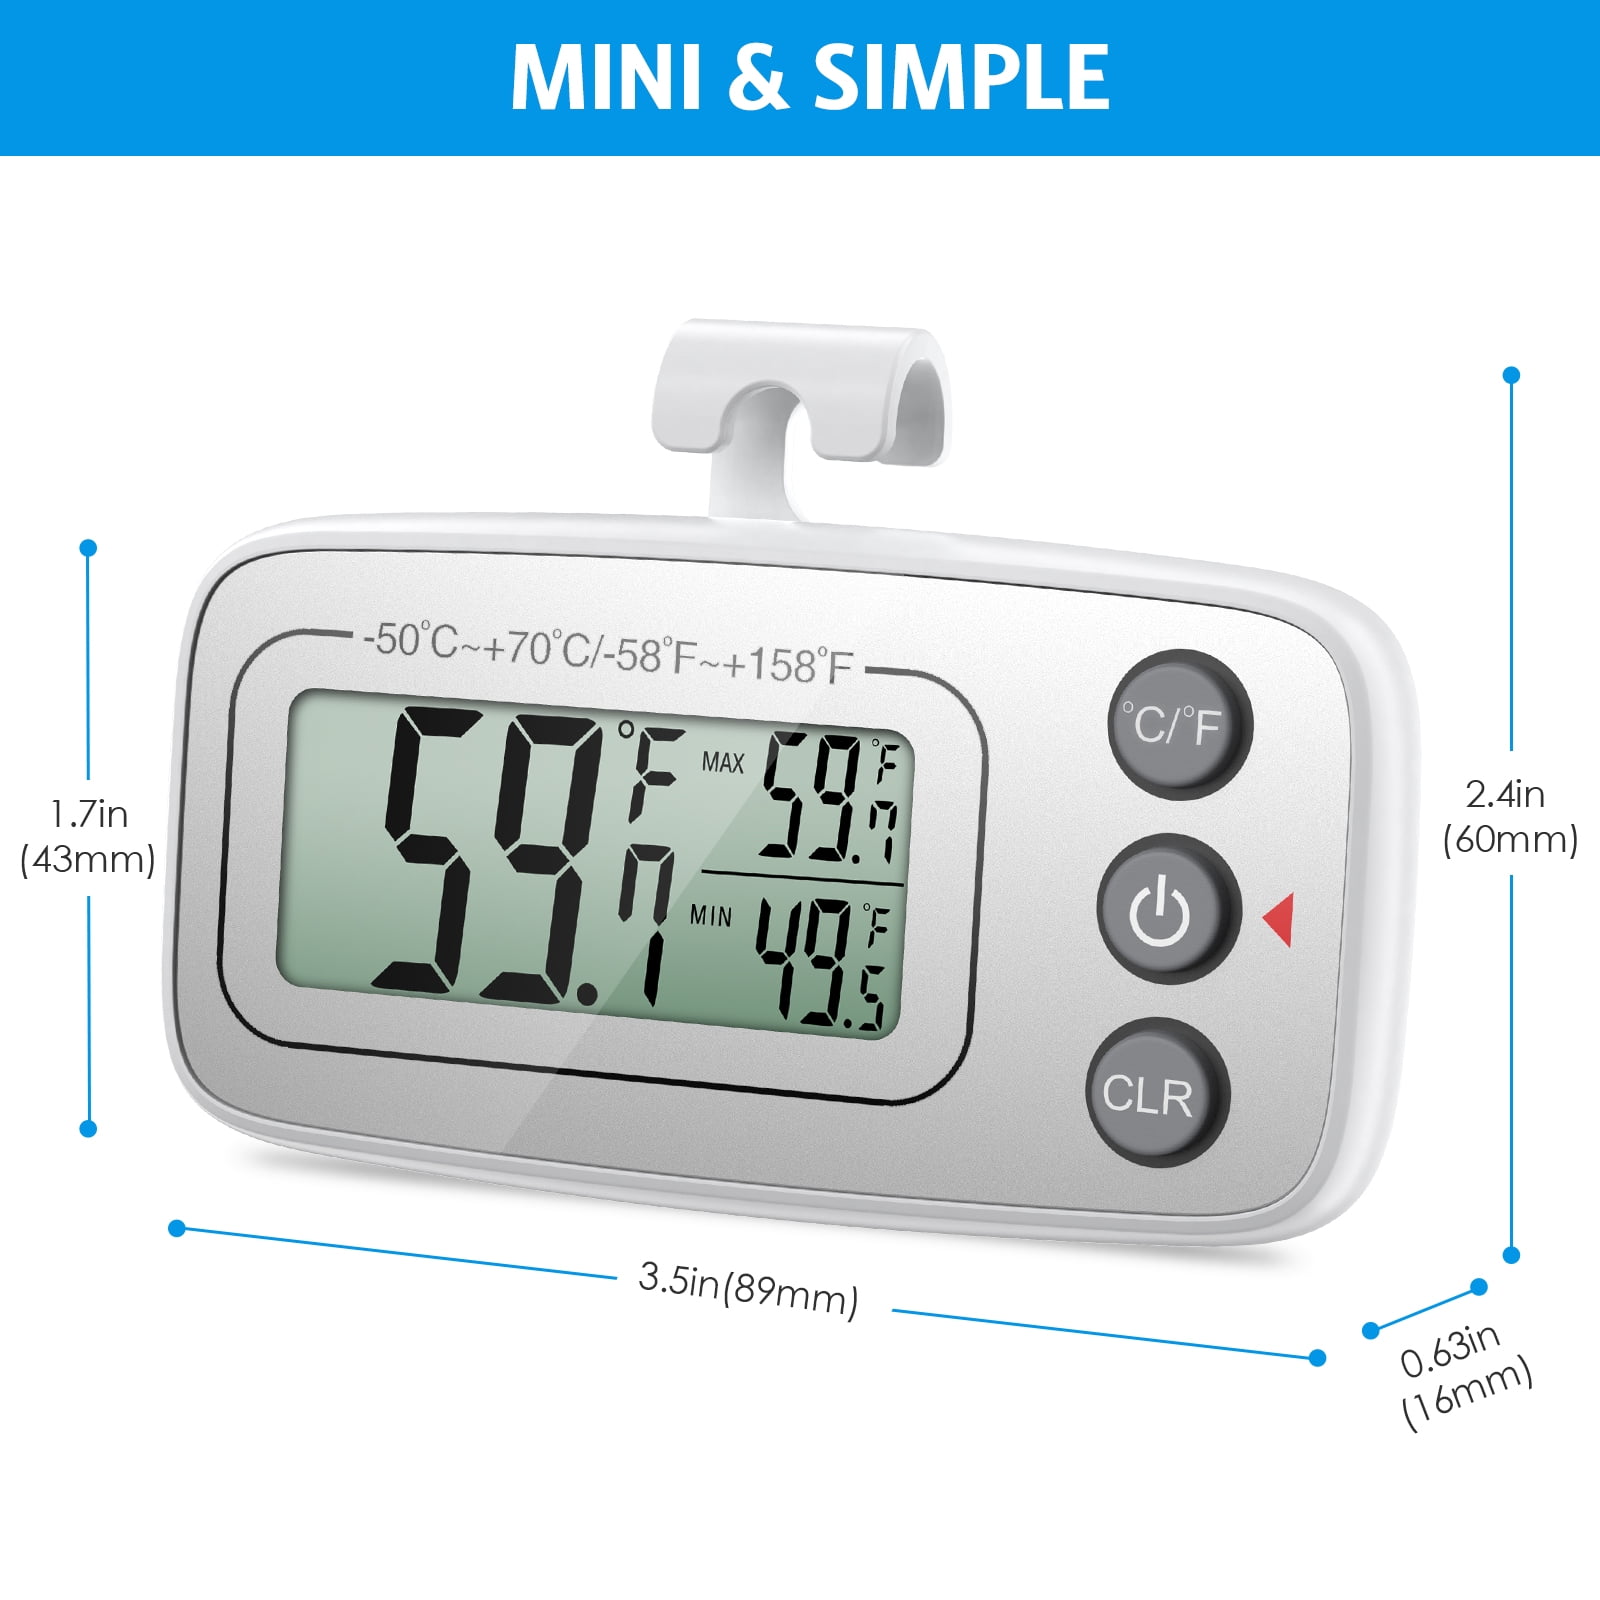 Cafes AMIR Restaurants Upgraded etc. Perfect for Home Easy to Read LCD Display Refrigerator Fridge Thermometer Digital Freezer Thermometer with Hook Bars Max/Min Function